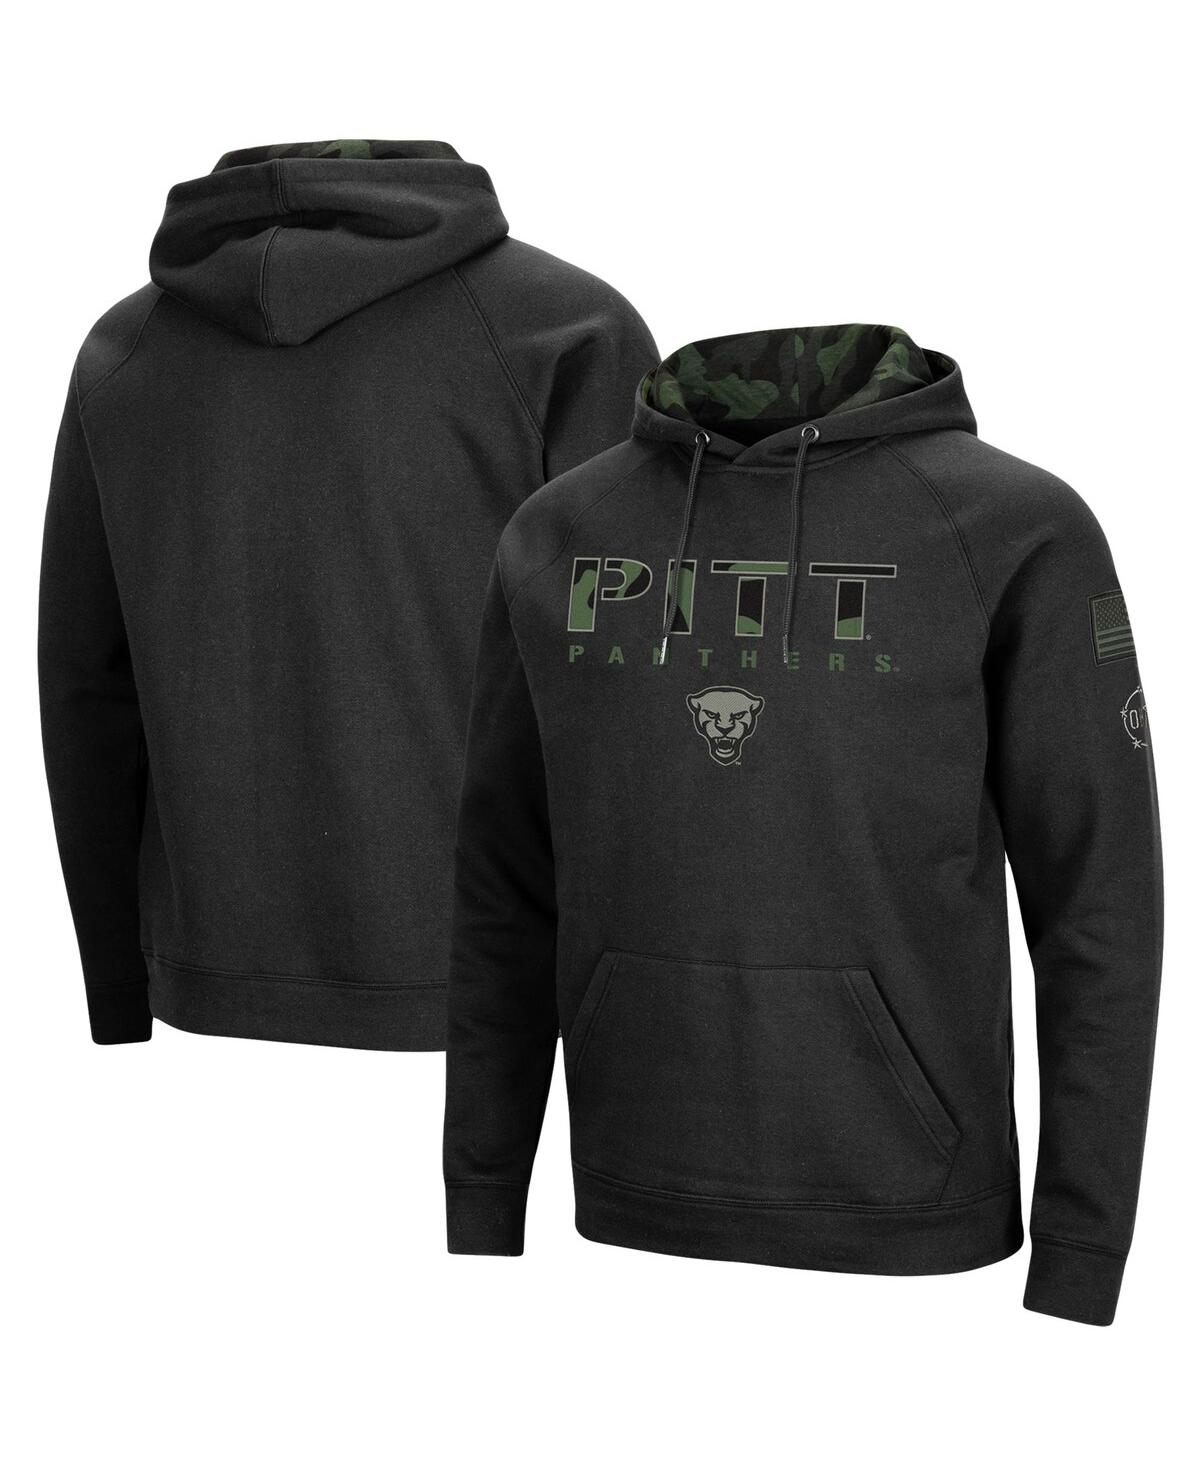 Shop Colosseum Men's  Black Pitt Panthers Oht Military-inspired Appreciation Camo Pullover Hoodie